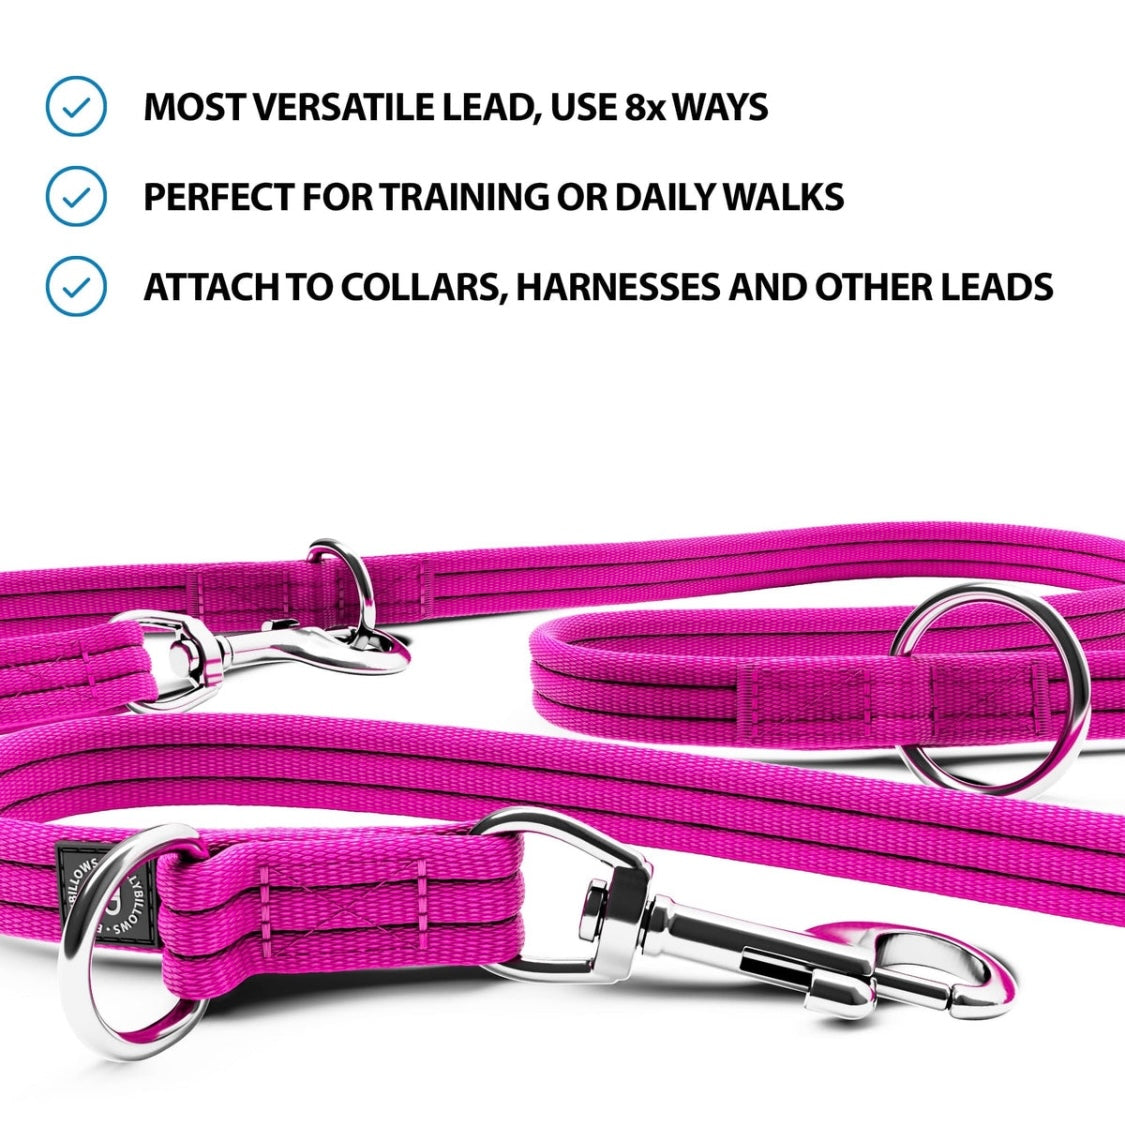 Double Ended Training Lead | All Breeds - Durable & Soft 2m Lead - Magentas